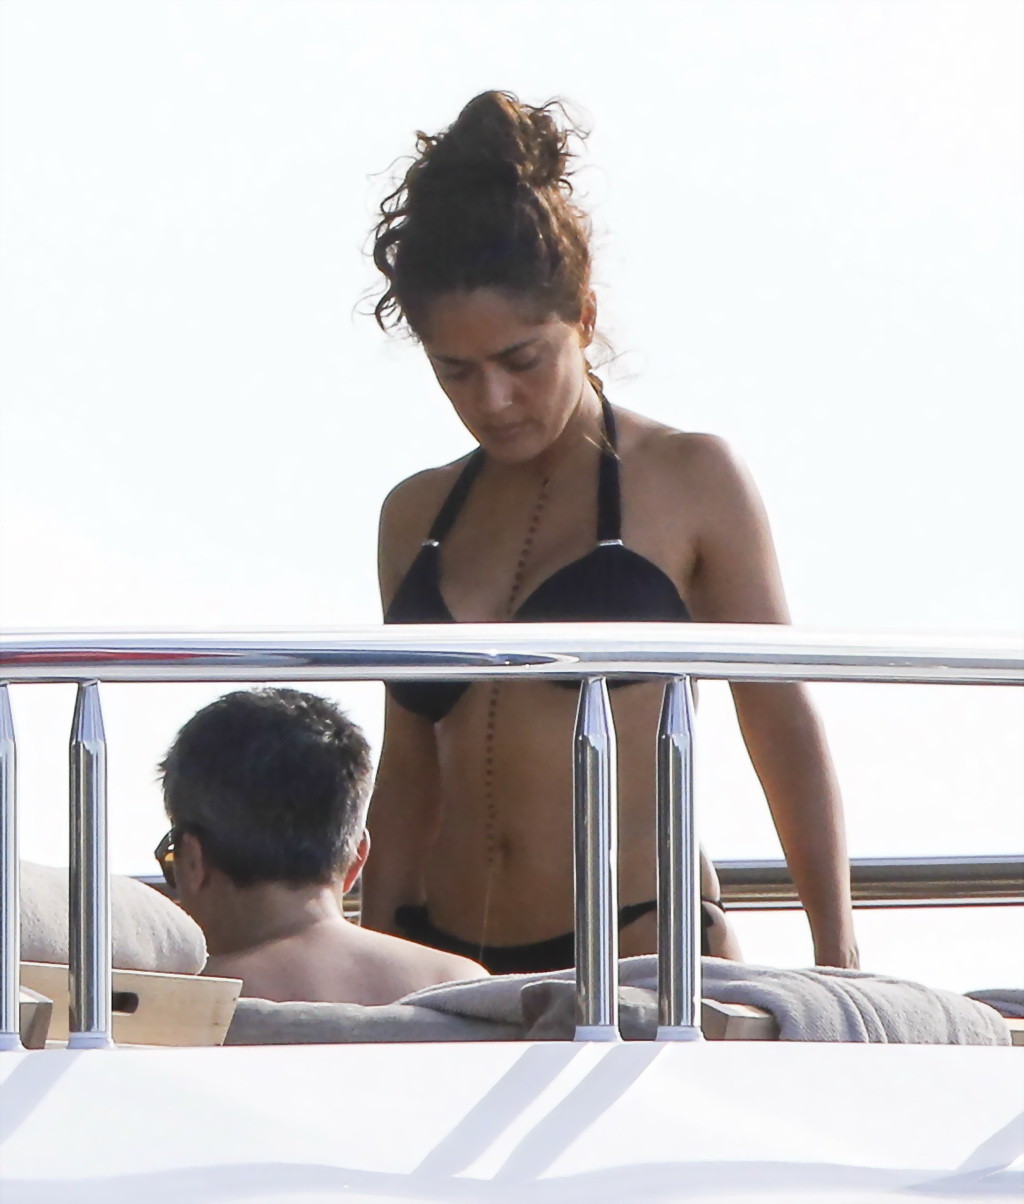 Salma Hayek shows off her big boobs and ass in tiny black bikini at a yacht in S #75177028